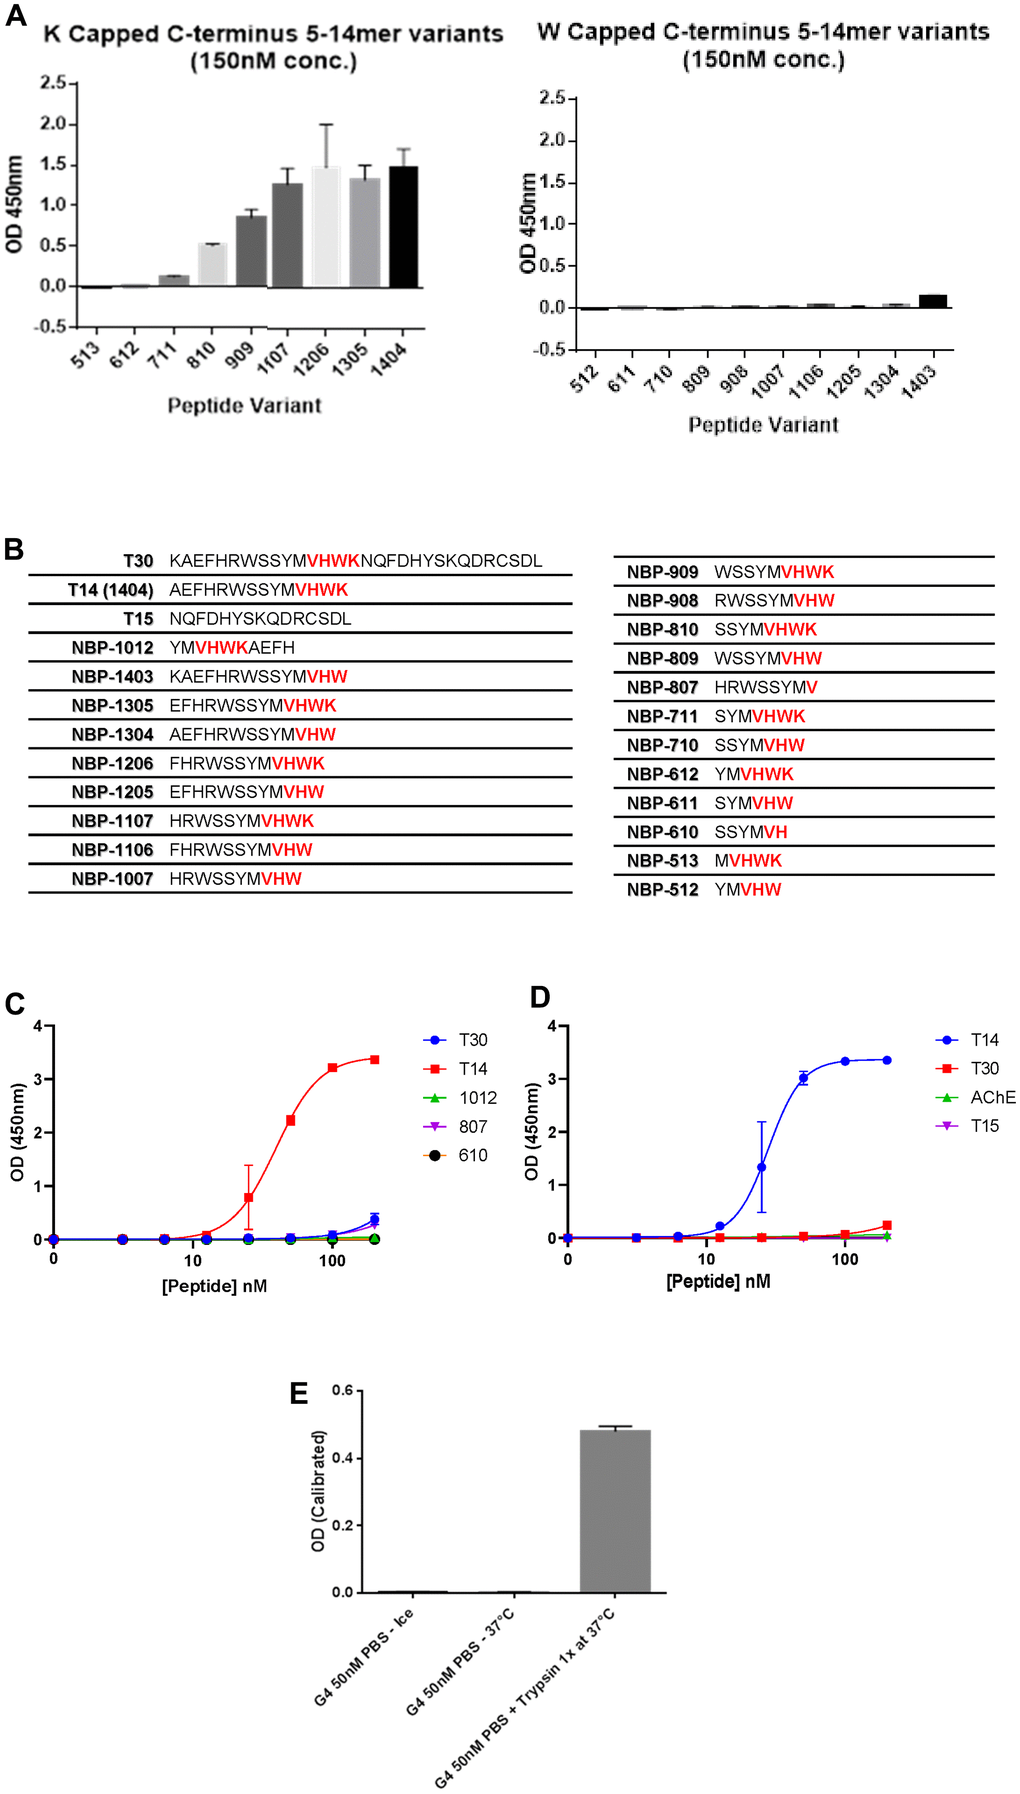 Specificity of T14 antibody. (A) Comparison of T14 antibody specificity using ELISA to detect peptides of various lengths with the C-terminus capped with W or K. (B) List of peptides used with amino acids sequences (epitope of the antibody -VHWK highlighted in red). (C) Dose-response of different peptides at the nanomolar range to determine the importance of the length and the epitope. (D) Dose response of T14, T30, T15 and AChE at nanomolar range. (E) Effect of trypsin on full AChE, cleaving T14 now detectable by the antibody.